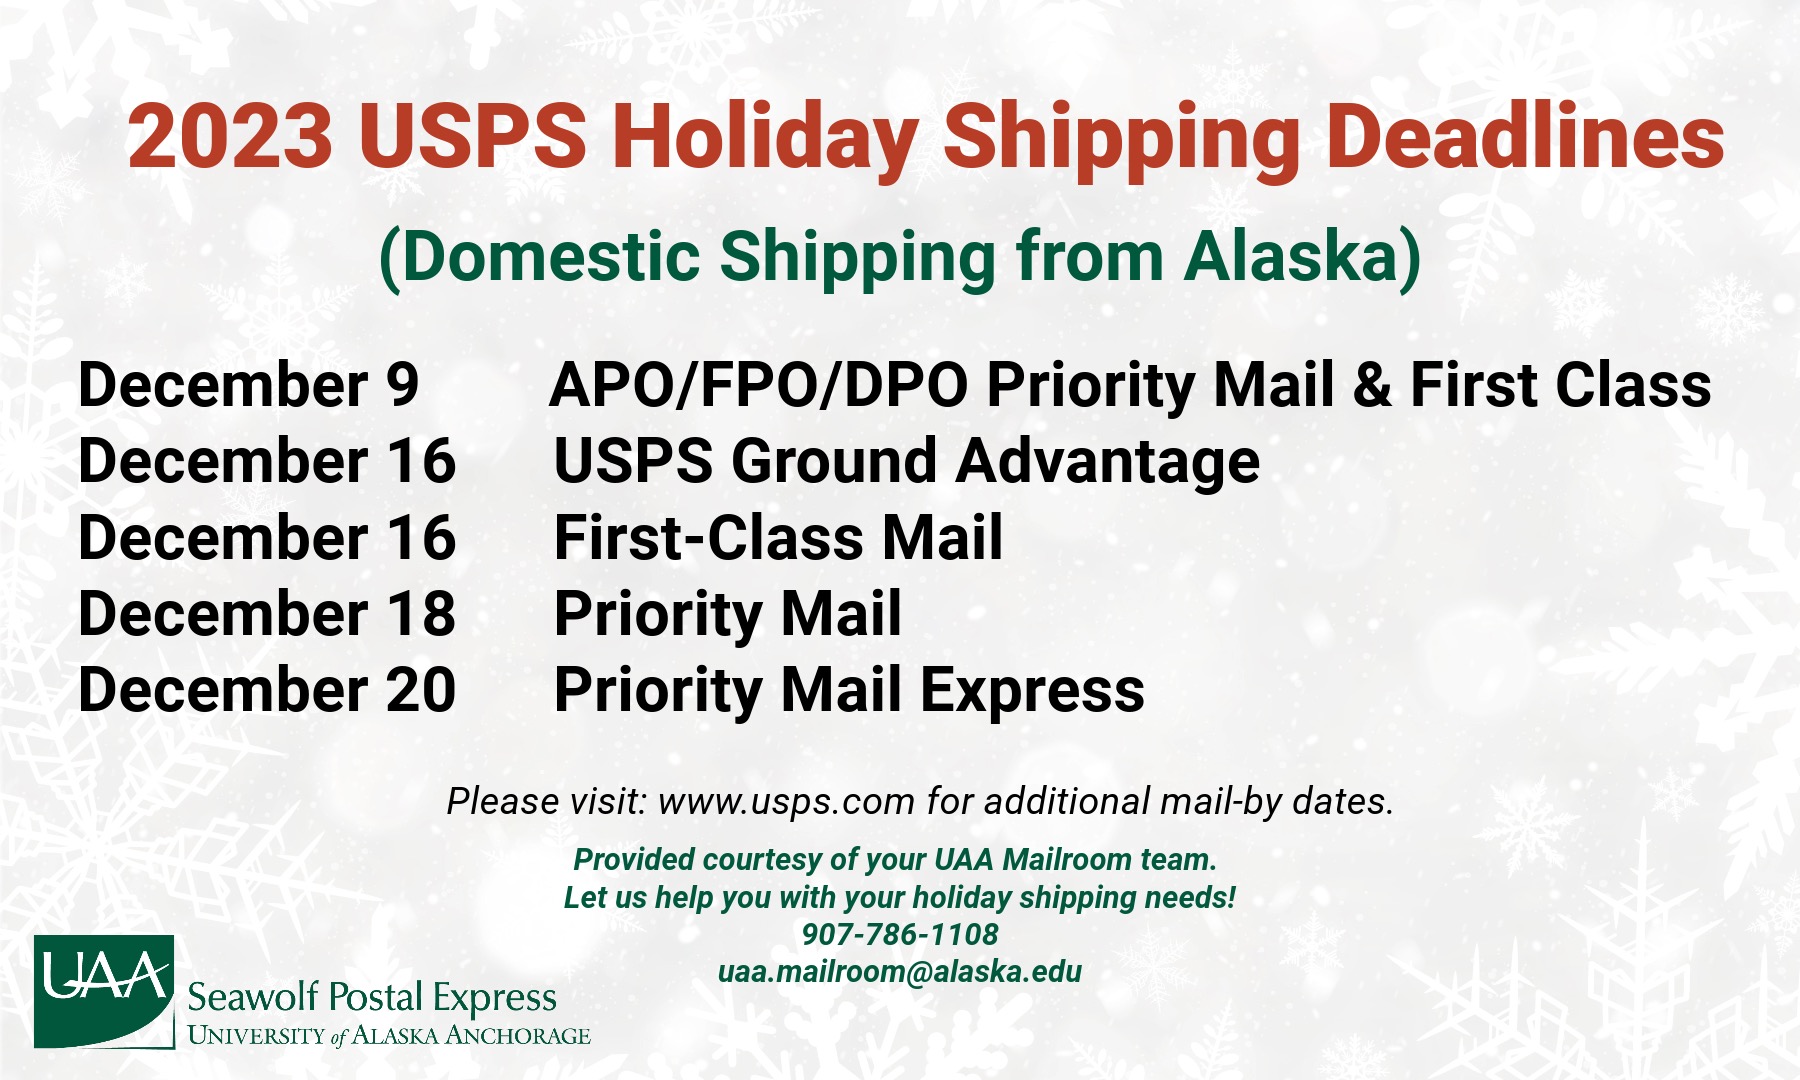 Graphic has white and gret snowflakes. The header reads "2023 USPS Holiday Shipping Deadlines" in red ink. The next line reads "Domestic Shippng From Alaska" in green ink. The next lines read "December 9, APO/FPO/DPO Priortity Mail & First Class December 16 USPS Ground Advantage December 16 First-Class Mail December 18 Priority Mail December 20 Priorirty Mail Express" The next line reads "Please visit: www.usps.com for additional mail-by dates. Provided coutesty of your UAA Mailroom team. Let us help you with your holiday shipping needs! 907-786-1108 or uaa.mailroom@alaska.edu" There is a green UAA Seawolf Postal Express logo at the bottom left corner. 